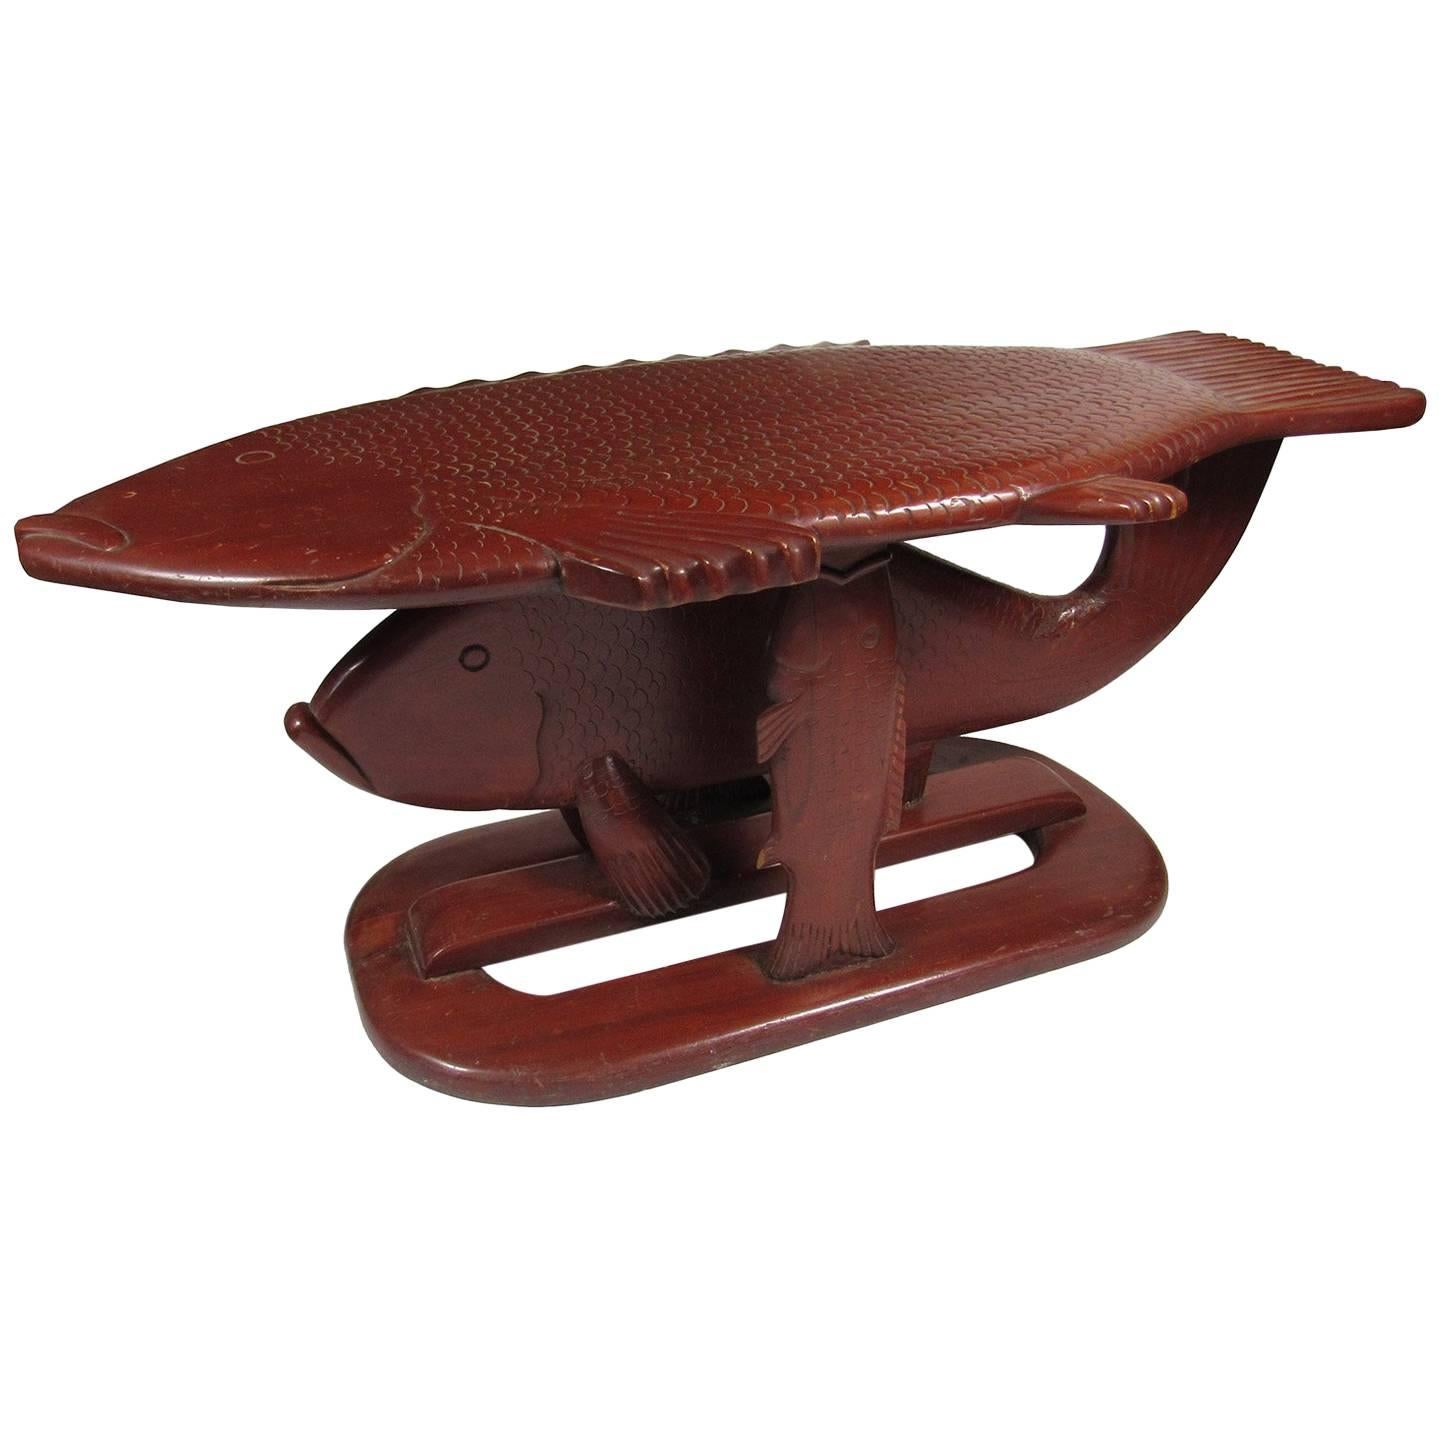 Vintage, mid-20th century, Whimsical, Folk Art carved wood fish form coffee table, 
Dimensions: 20 x 48 x 23 inches.